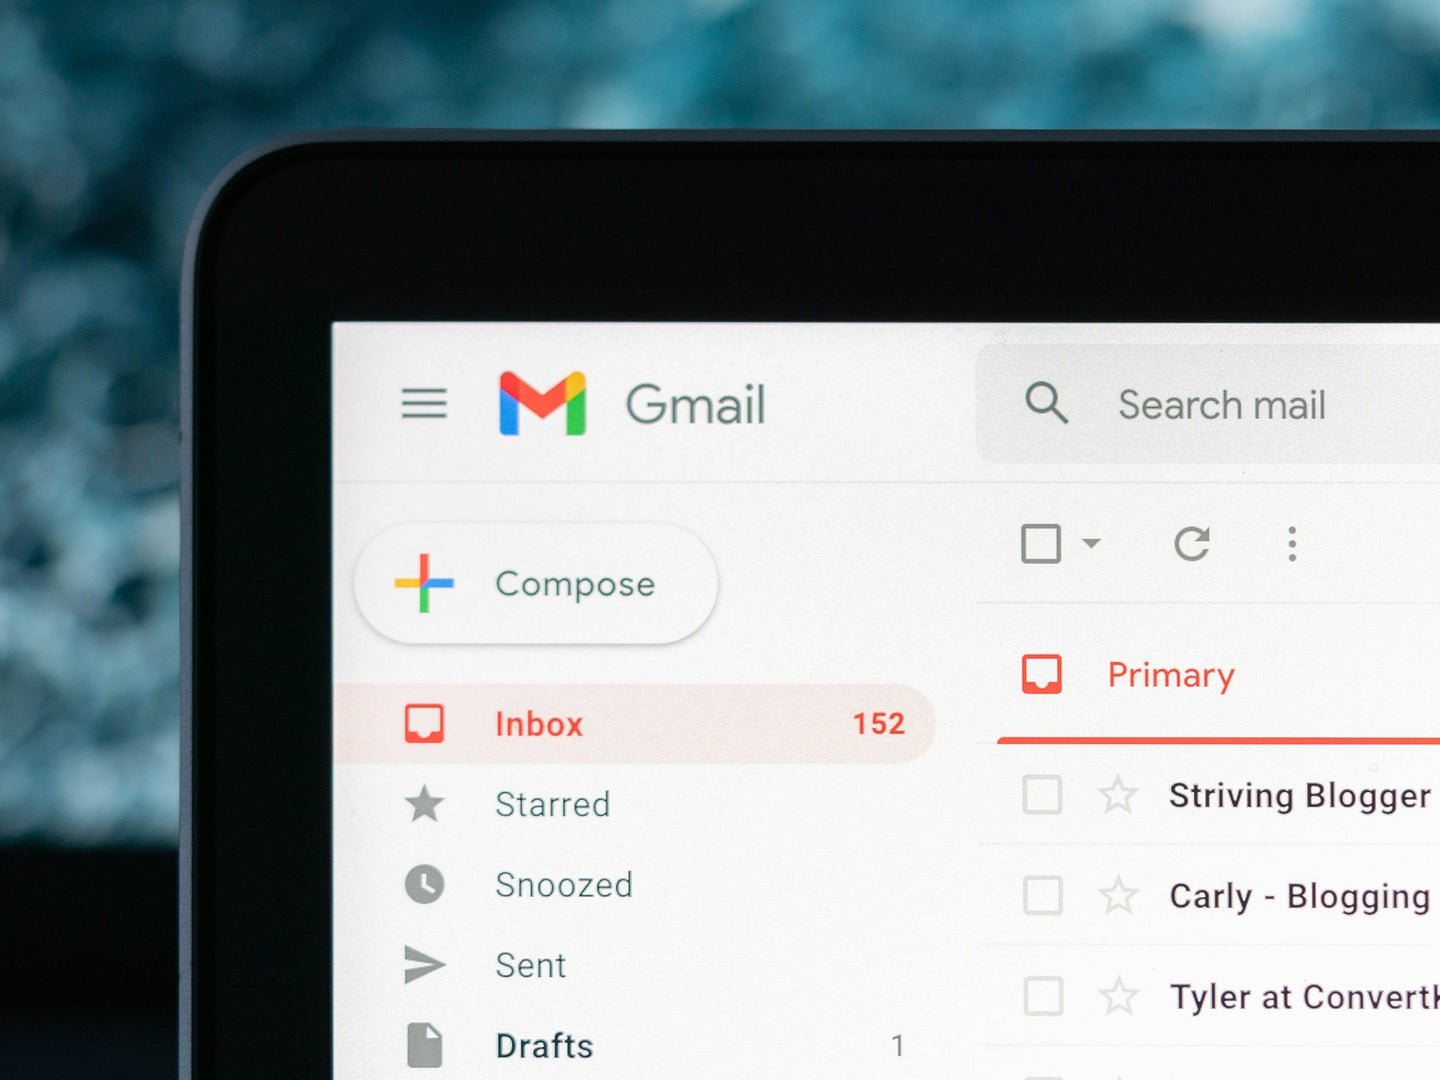 Google integrated its other apps into Gmail. Here’s how to best use them.